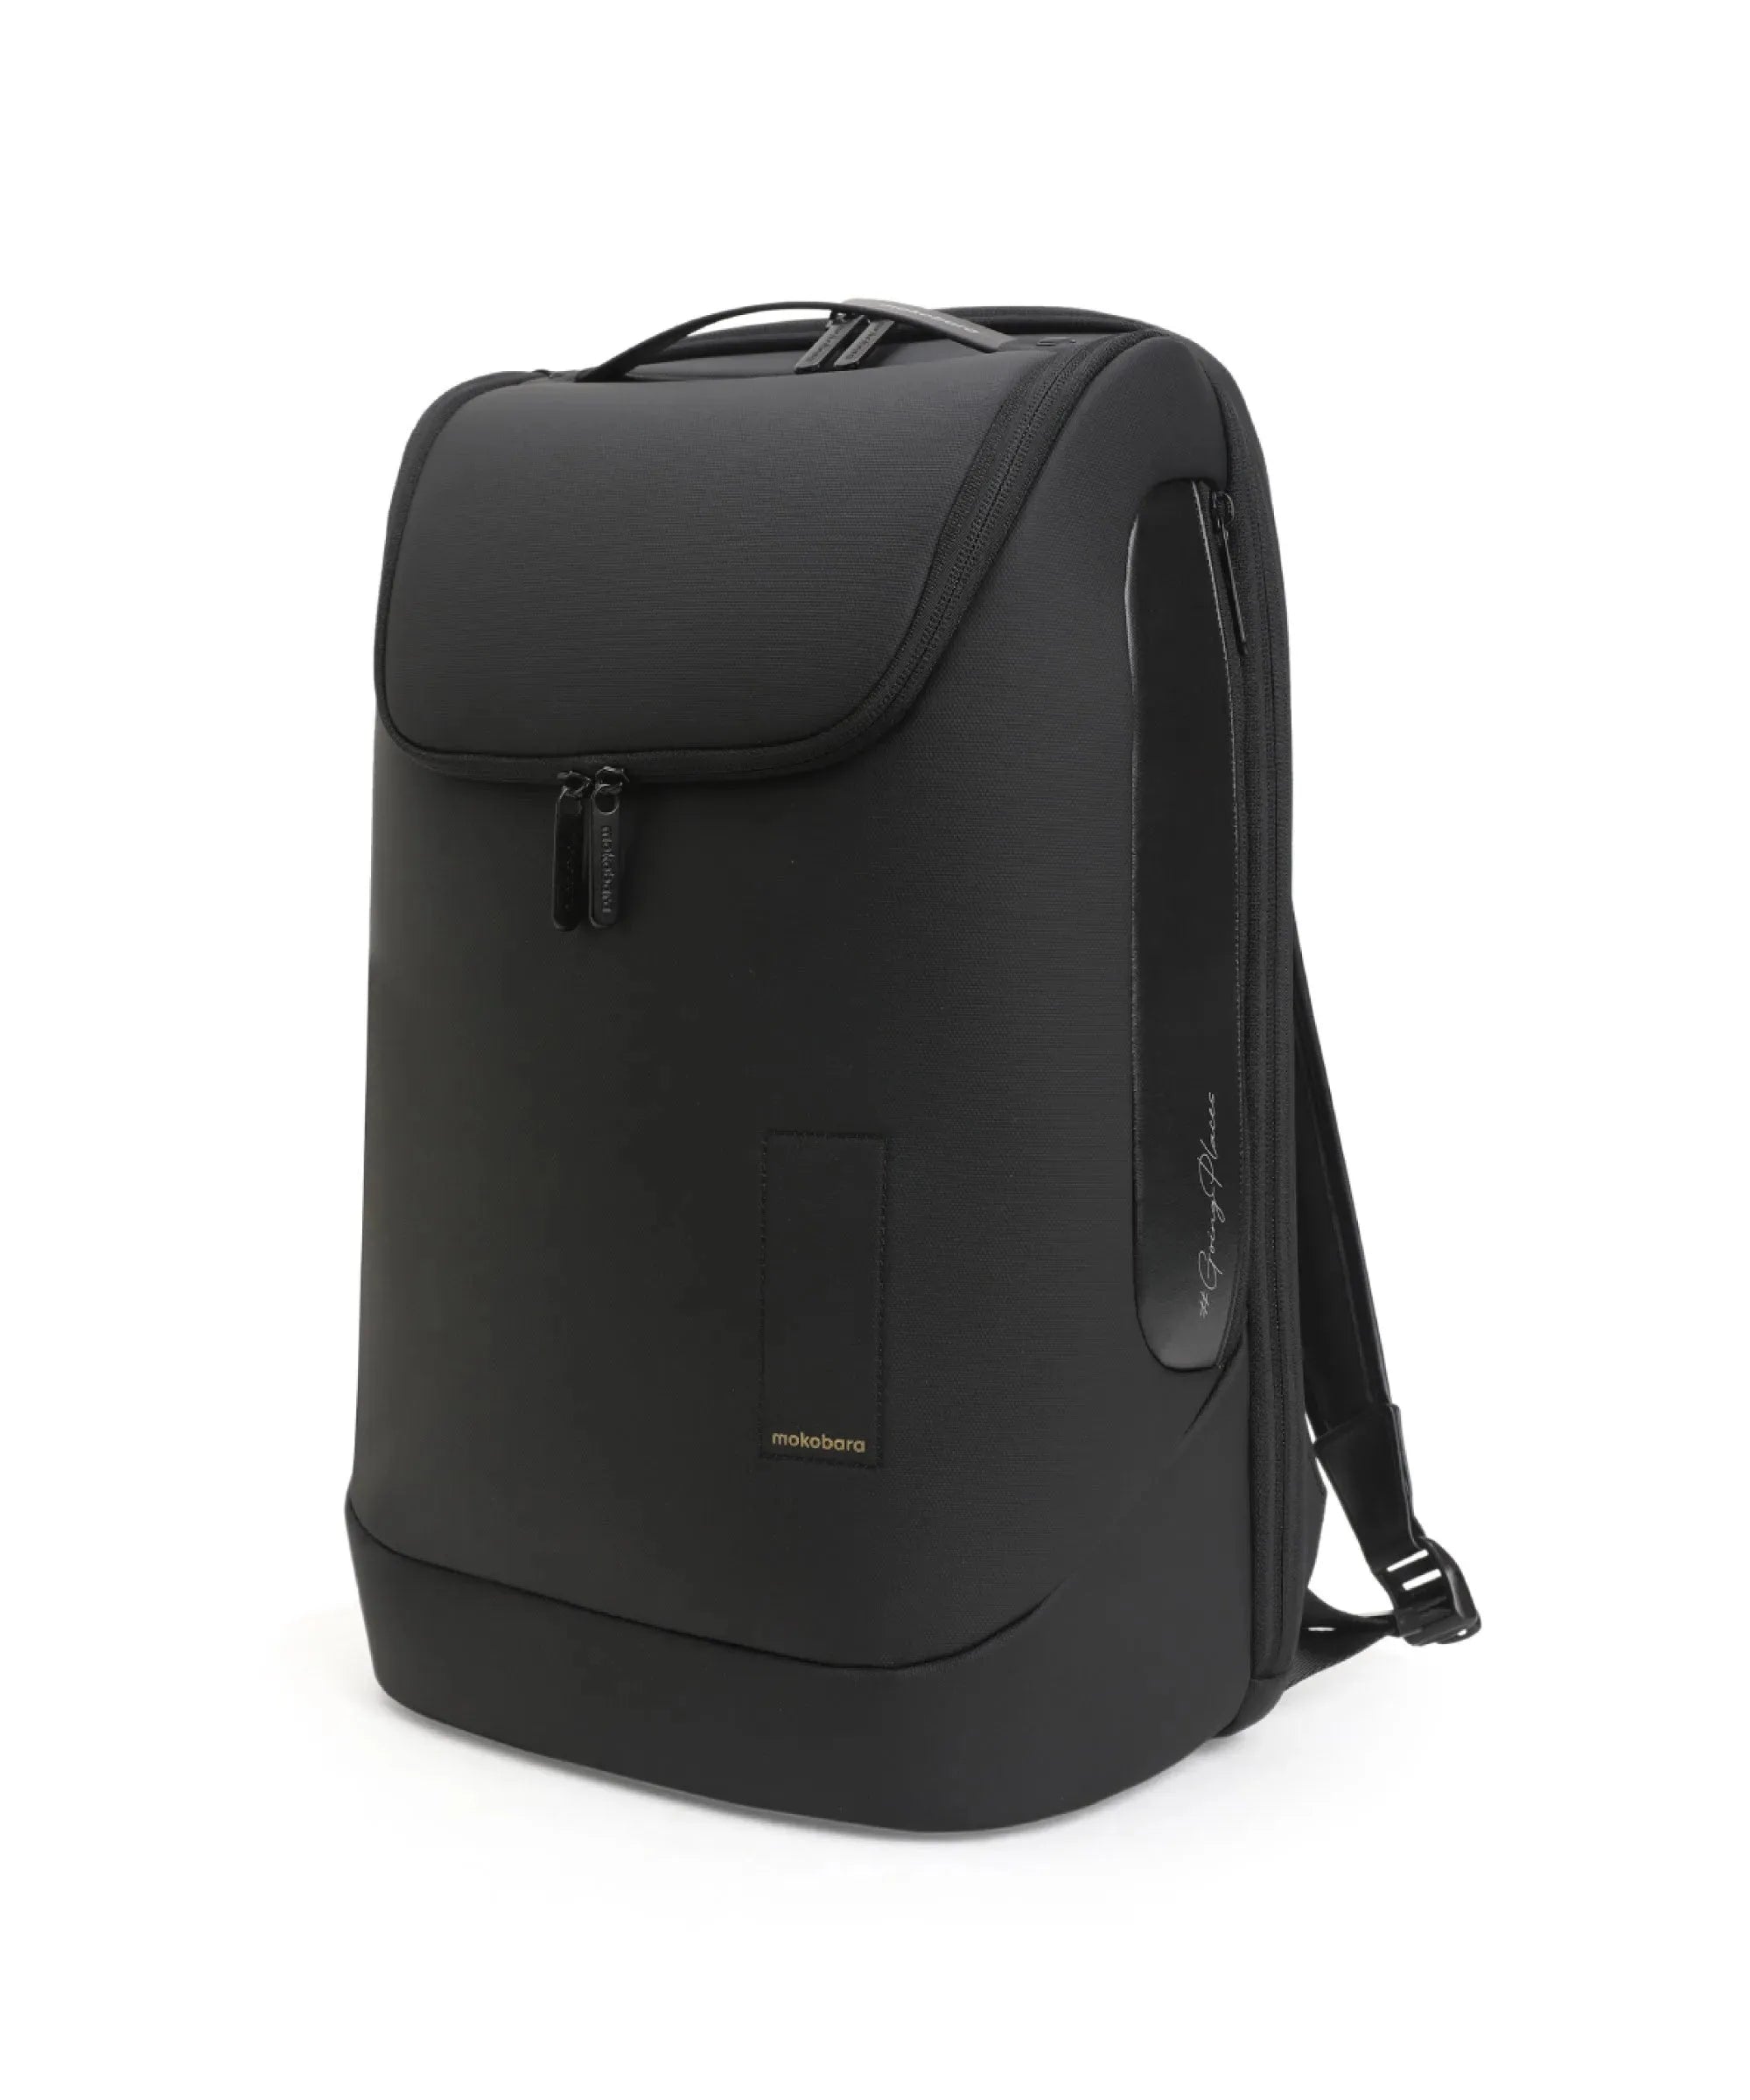 The Transit Backpack Crypto 1 0dfd9214 bed1 49fc b524 e875306b9b0f